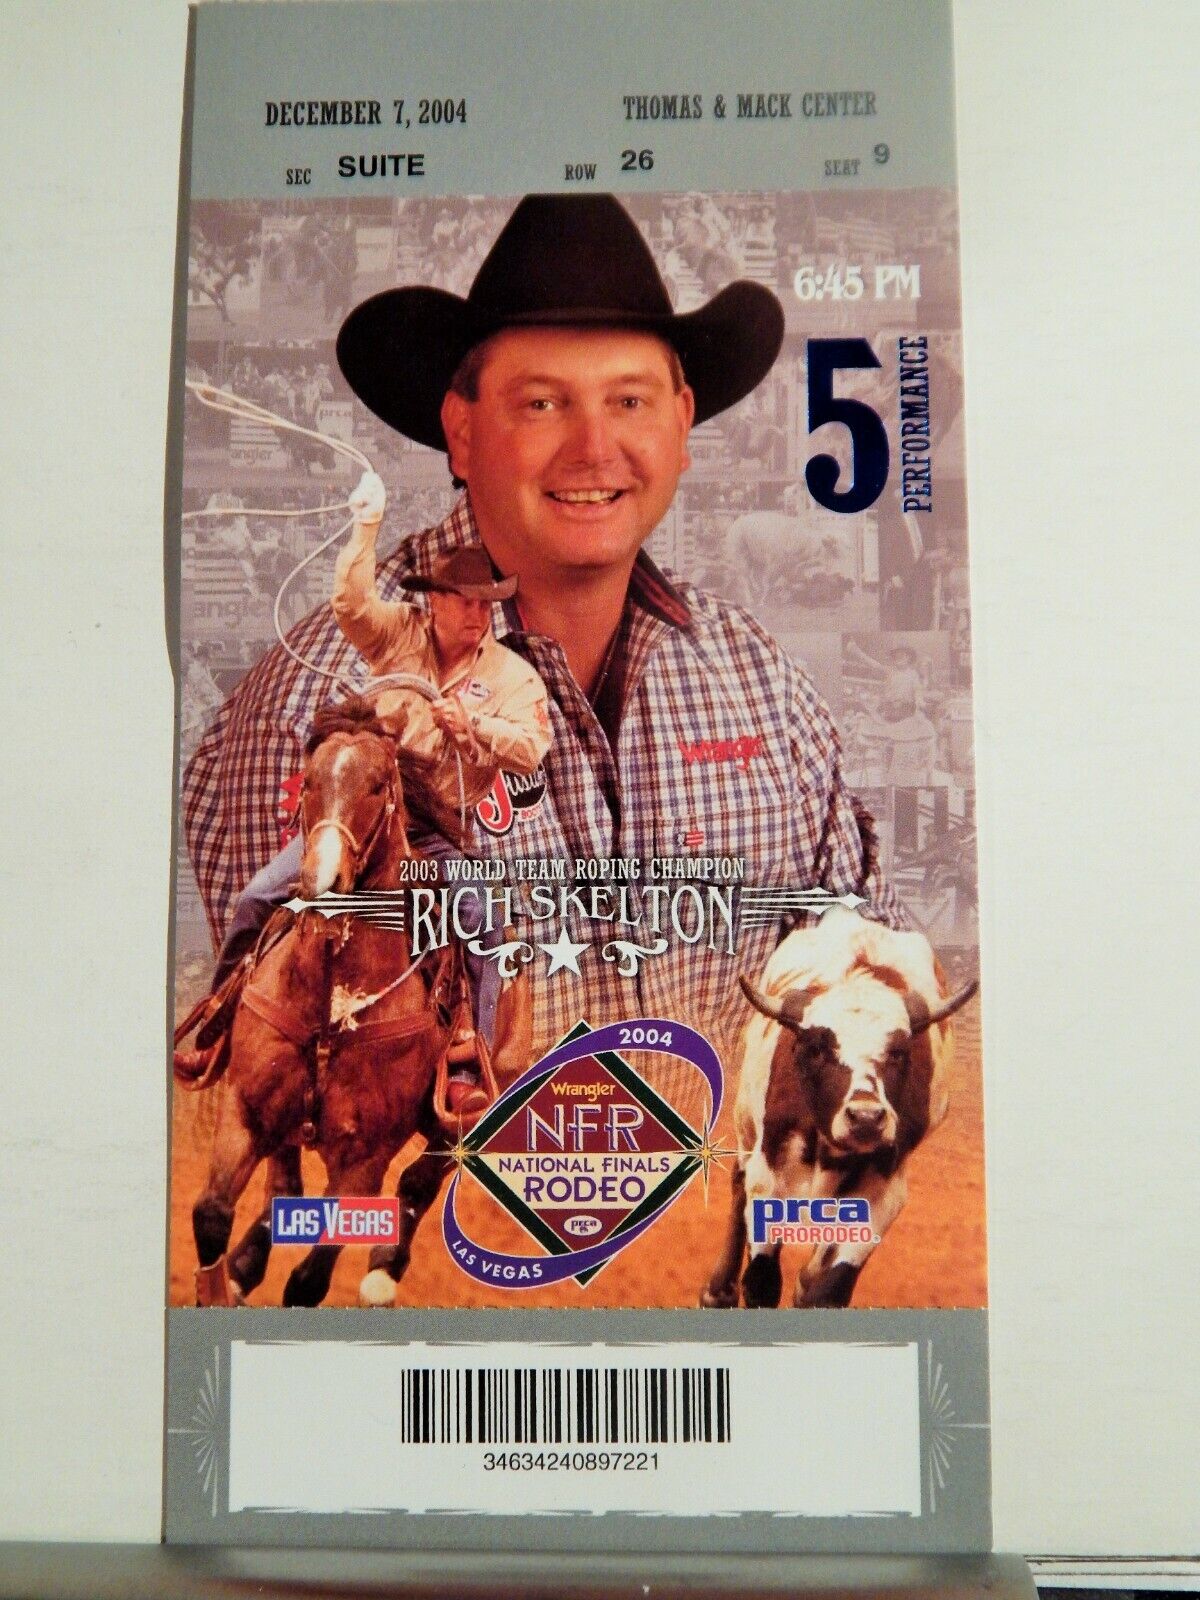 2004 NATIONAL FINALS RODEO LG ORIGINAL USED TICKET RICH SKELTON COLOR Photo Poster painting